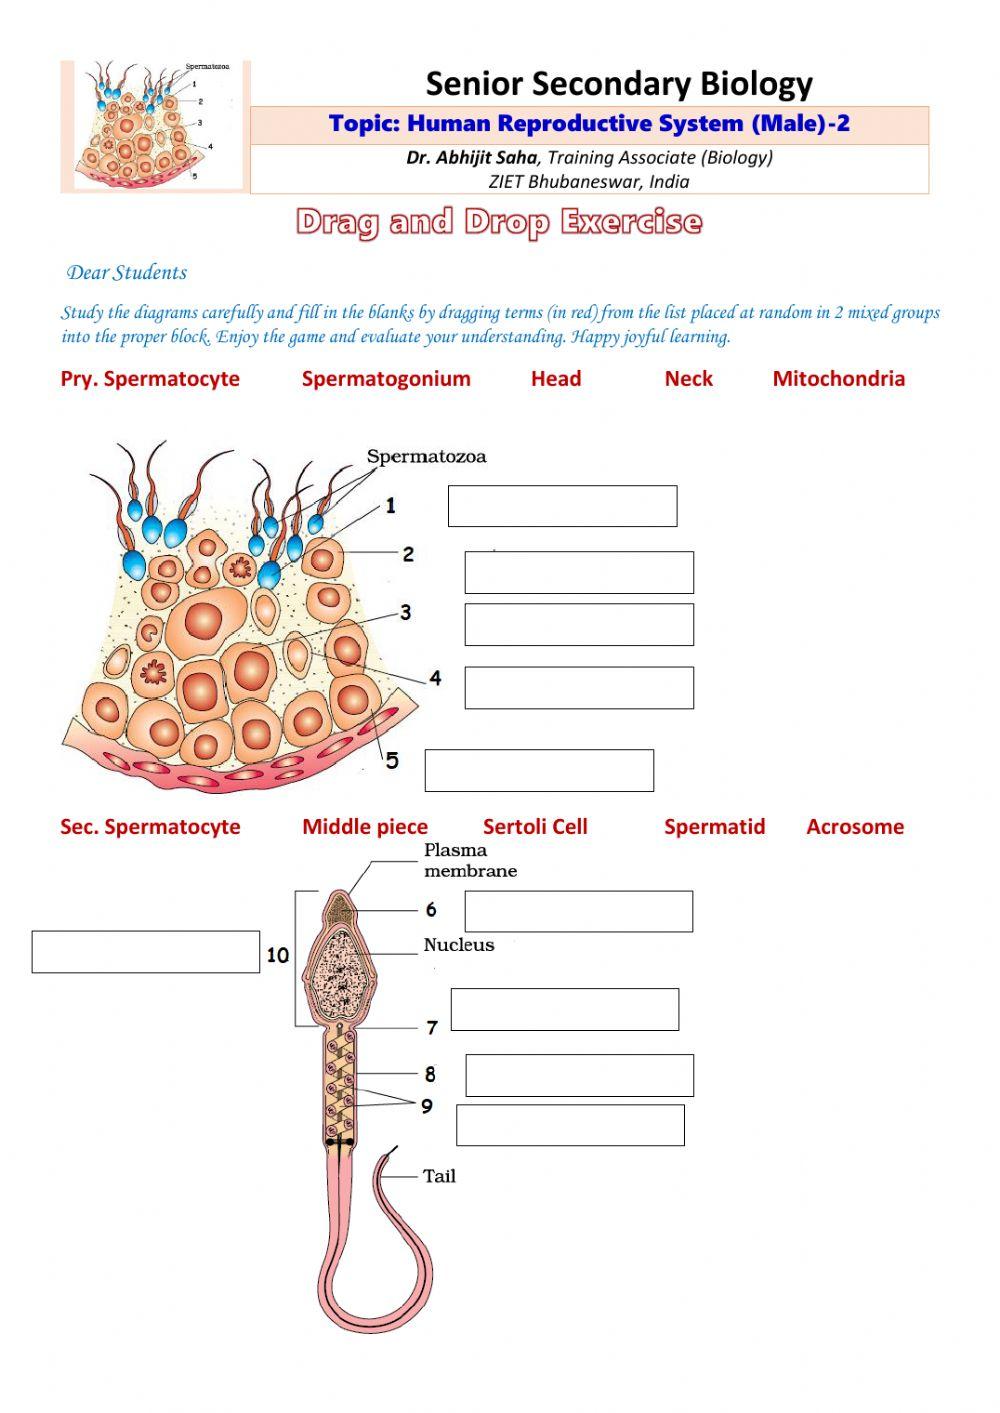 Senior Secondary Biology-Human Male Reproductive System-2